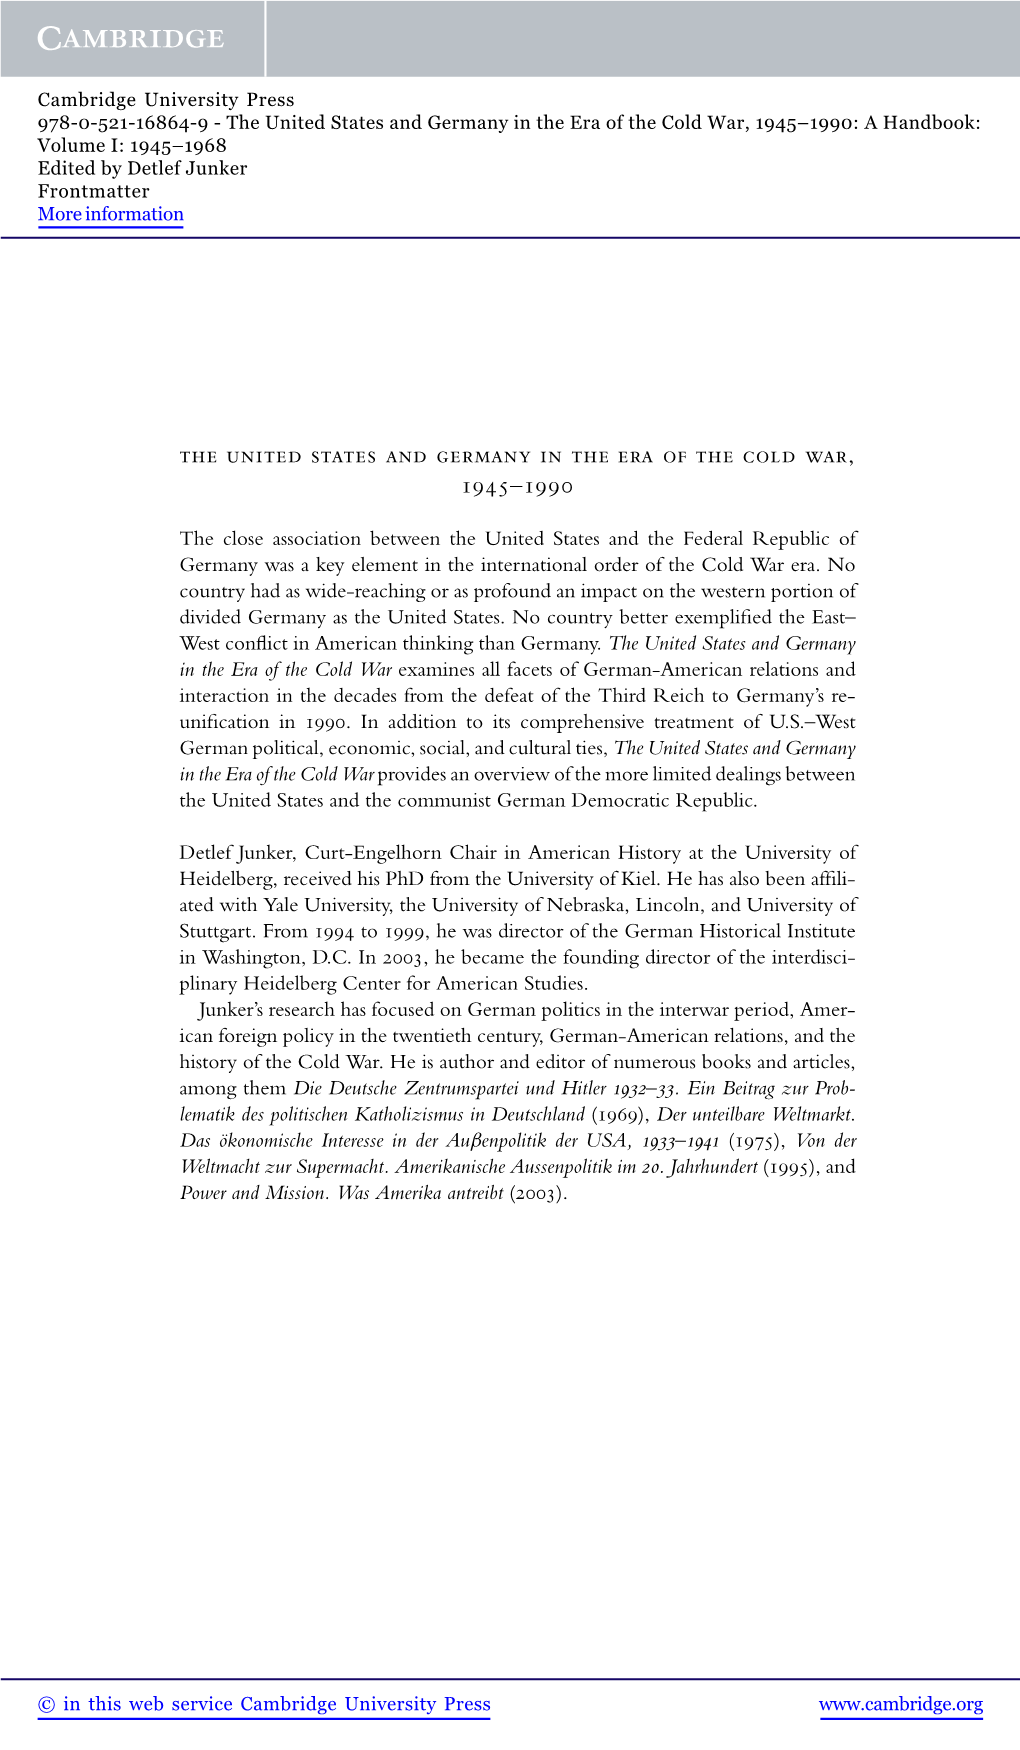 The United States and Germany in the Era of the Cold War, 1945–1990: a Handbook: Volume I: 1945–1968 Edited by Detlef Junker Frontmatter More Information